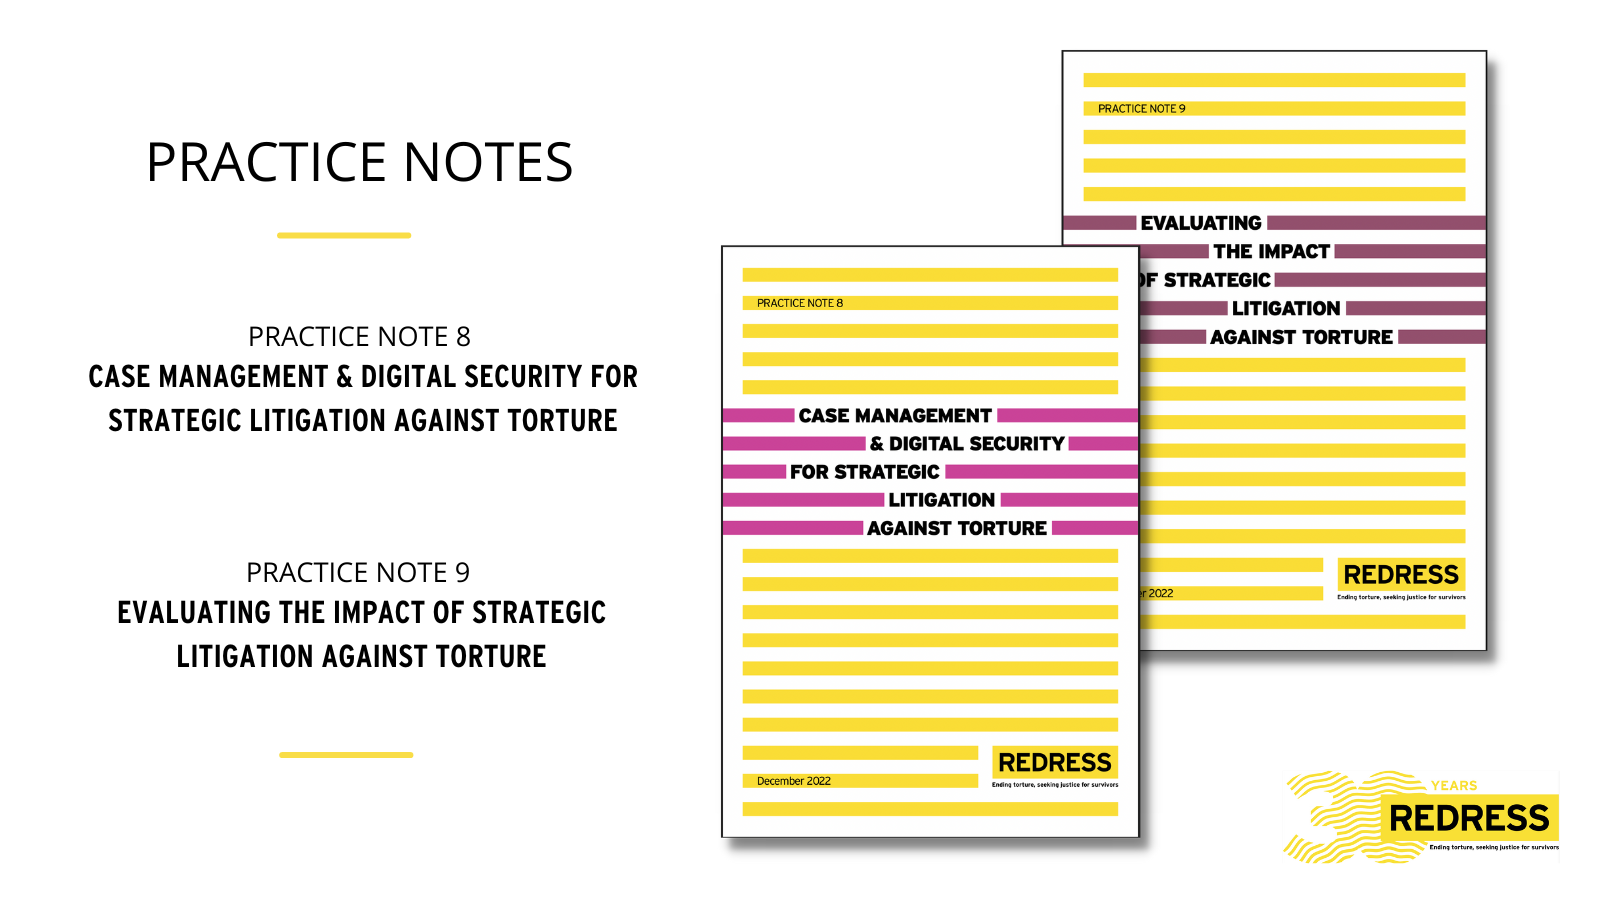 New Practices Notes on Best Practices on Case Management, Digital Security and Evaluation of Strategic Litigation Against Torture